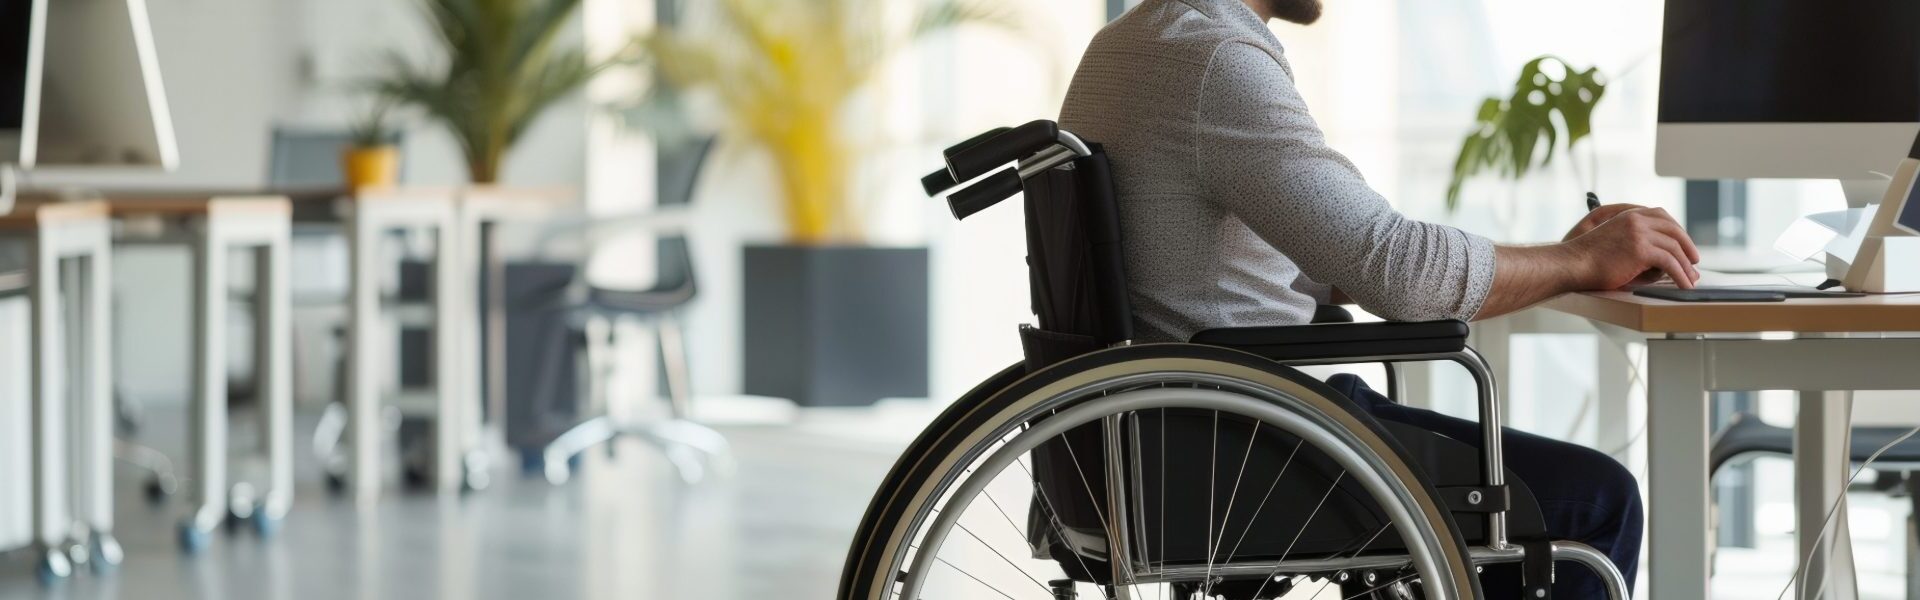 The European Accessibility Act: What Hoteliers Need to Know